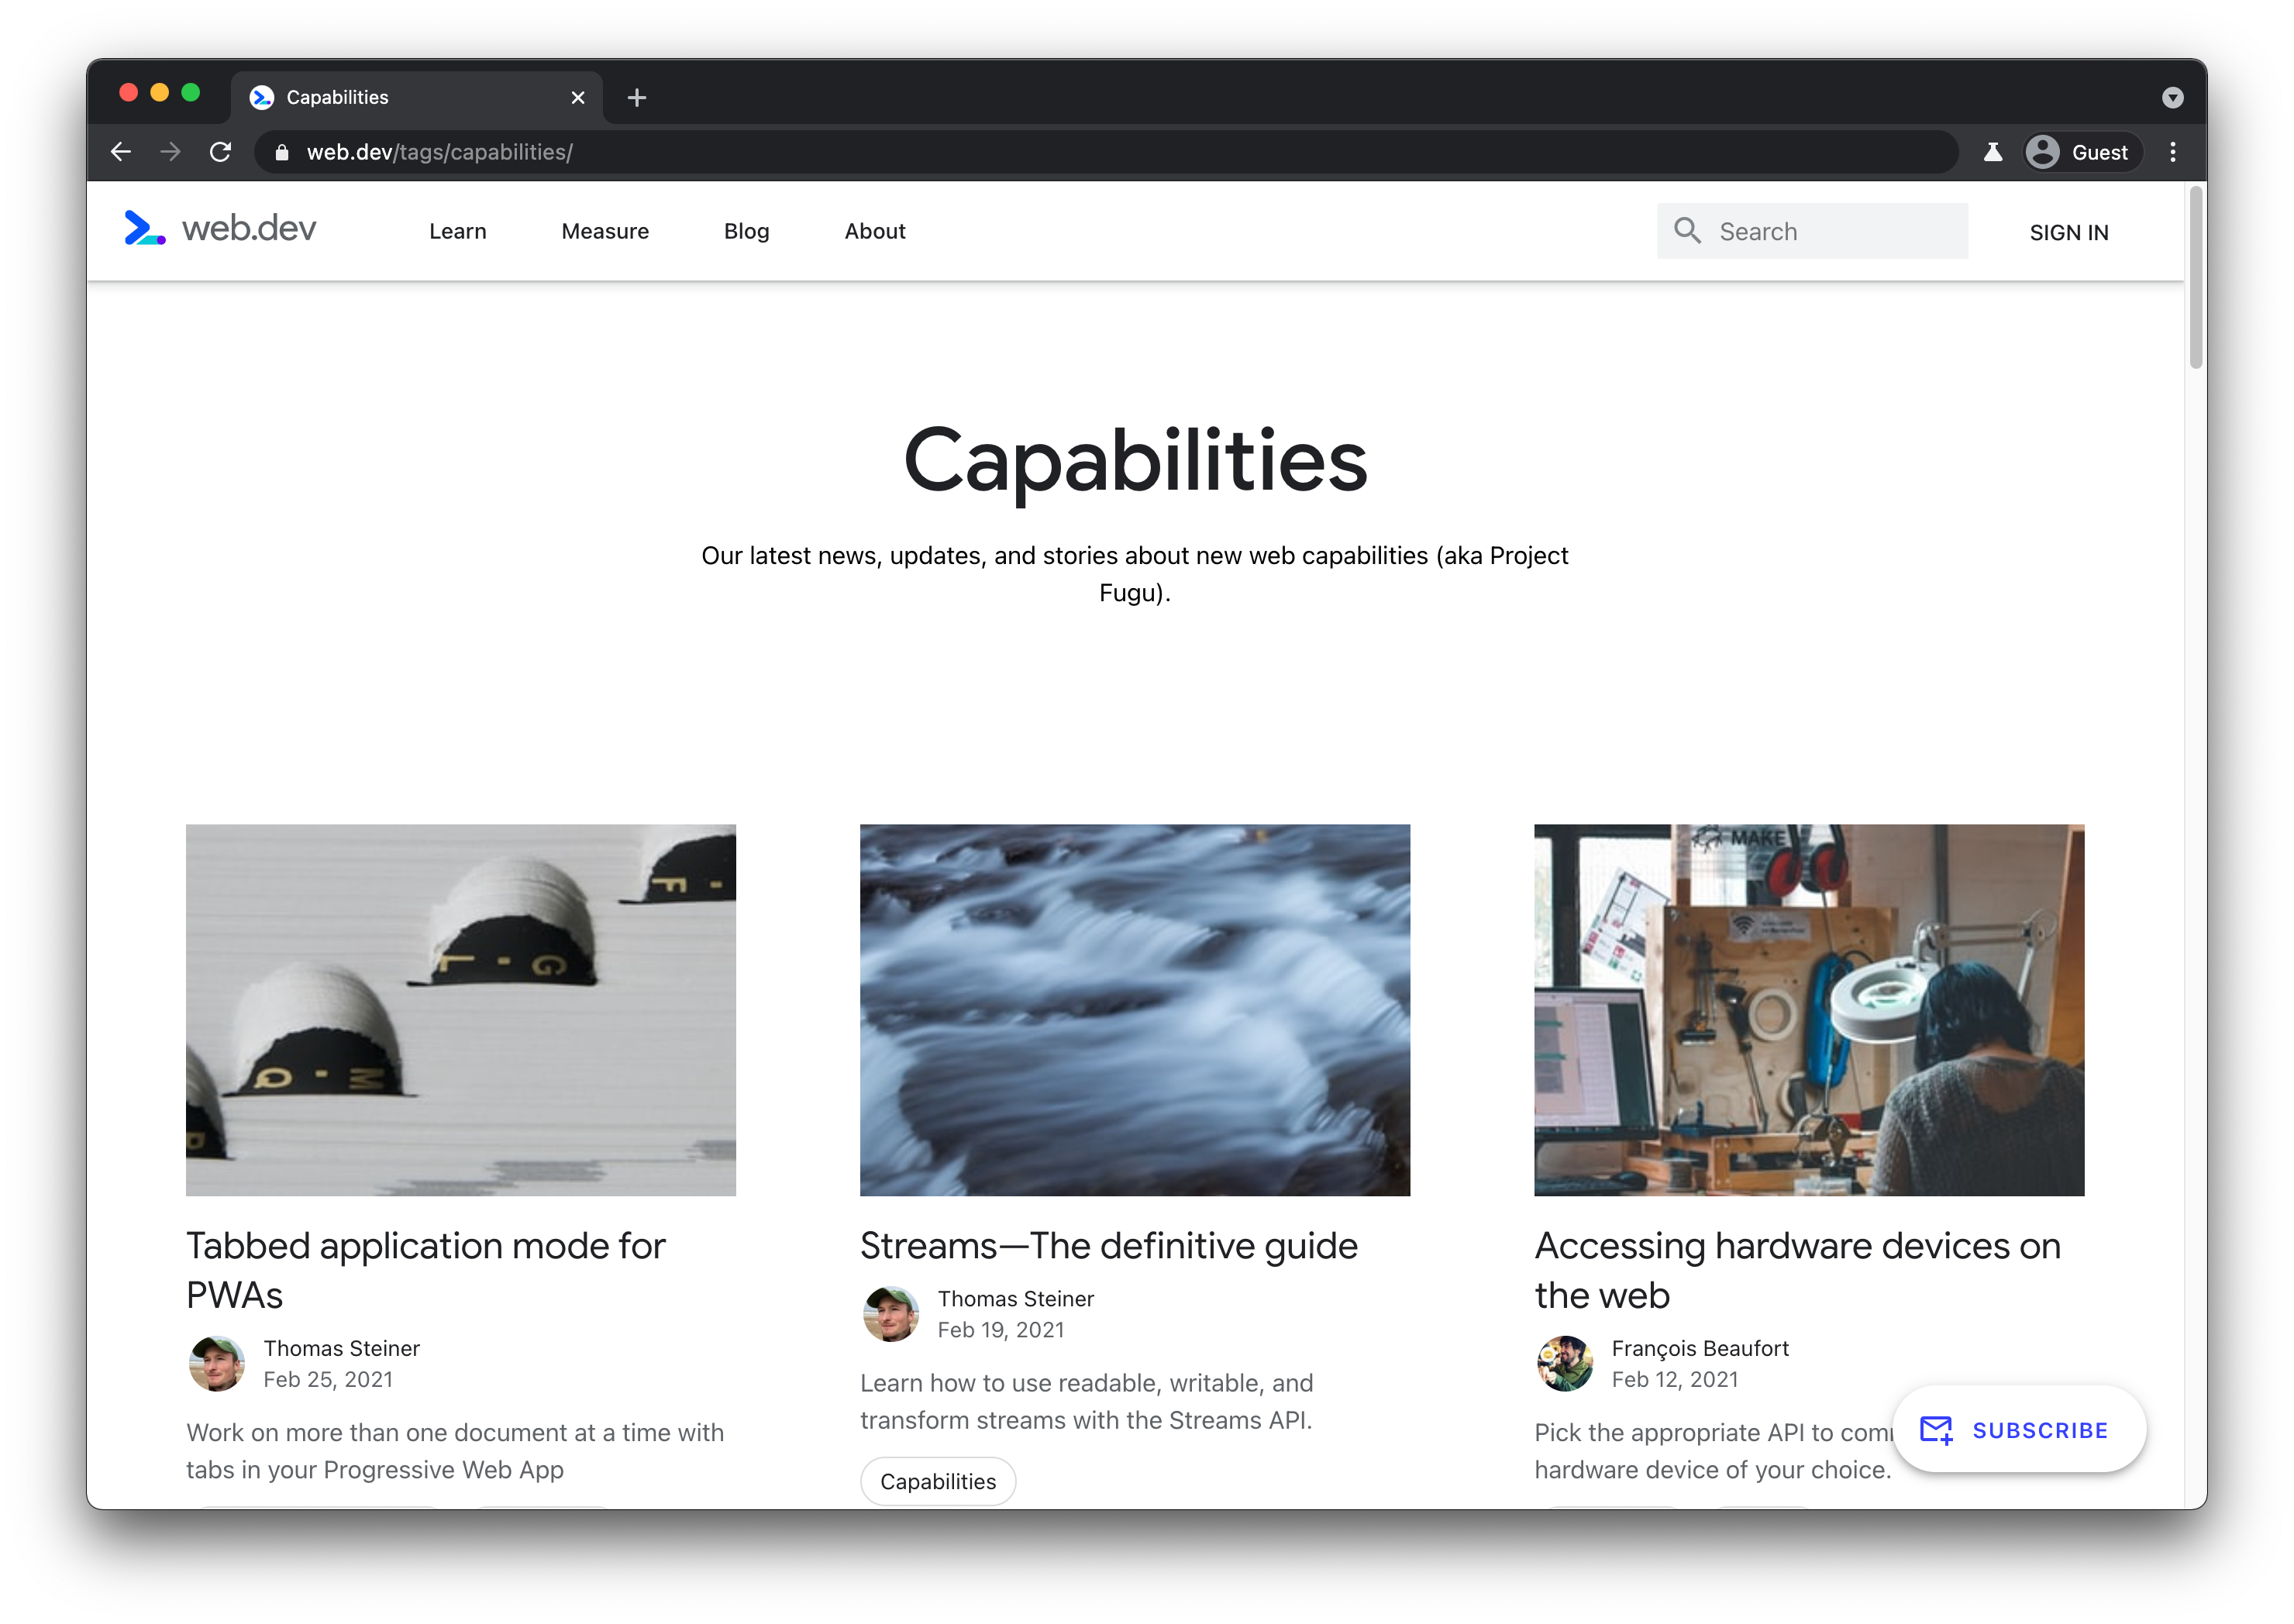 Landing page of the “Capabilities” section of the site web.dev.